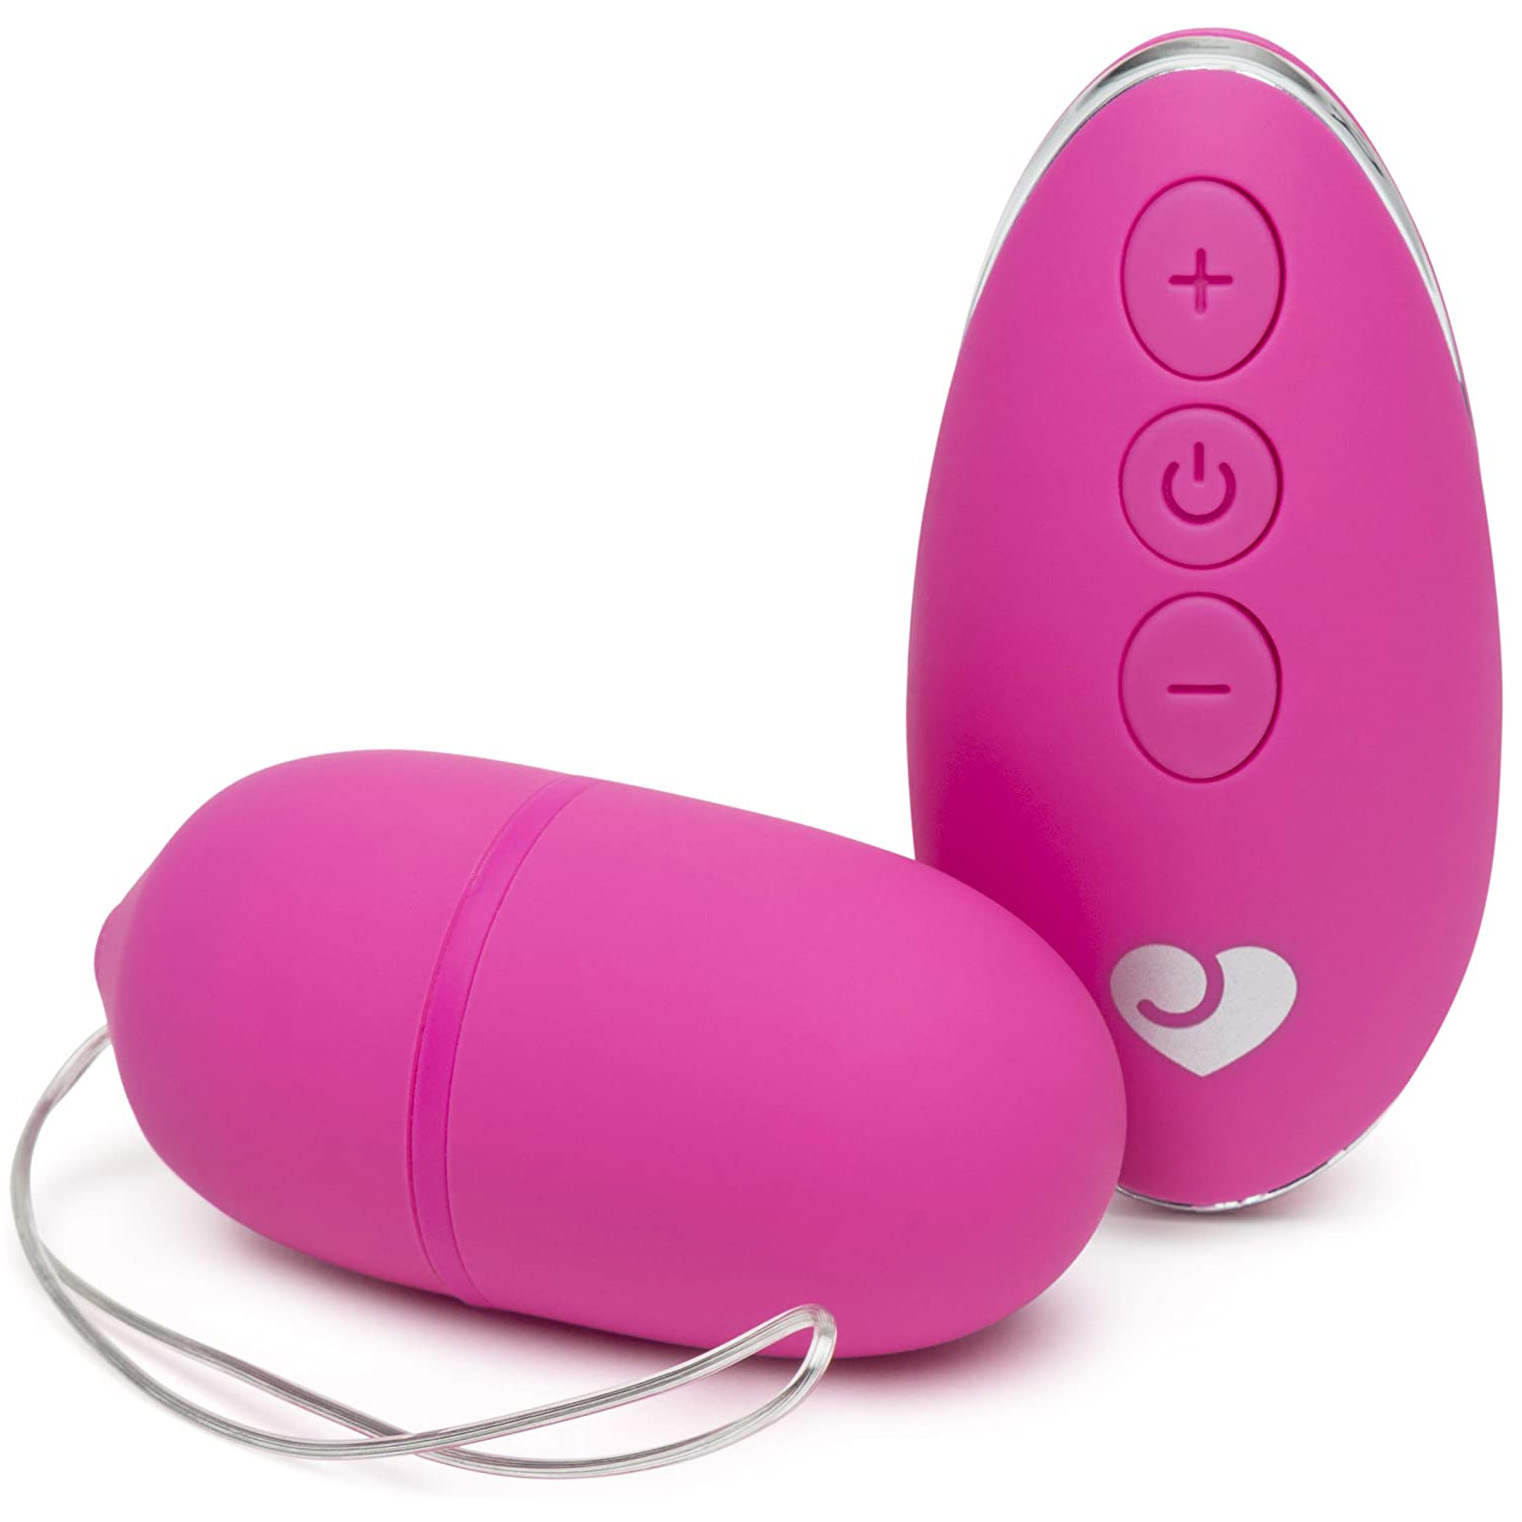  Remote Control Pantie vibratiers for Date Night vibratiers  Small Wireless Massager Toy for Adult Massage Ball Vibrating Remote Vibrant  Wireless Panties : Health & Household